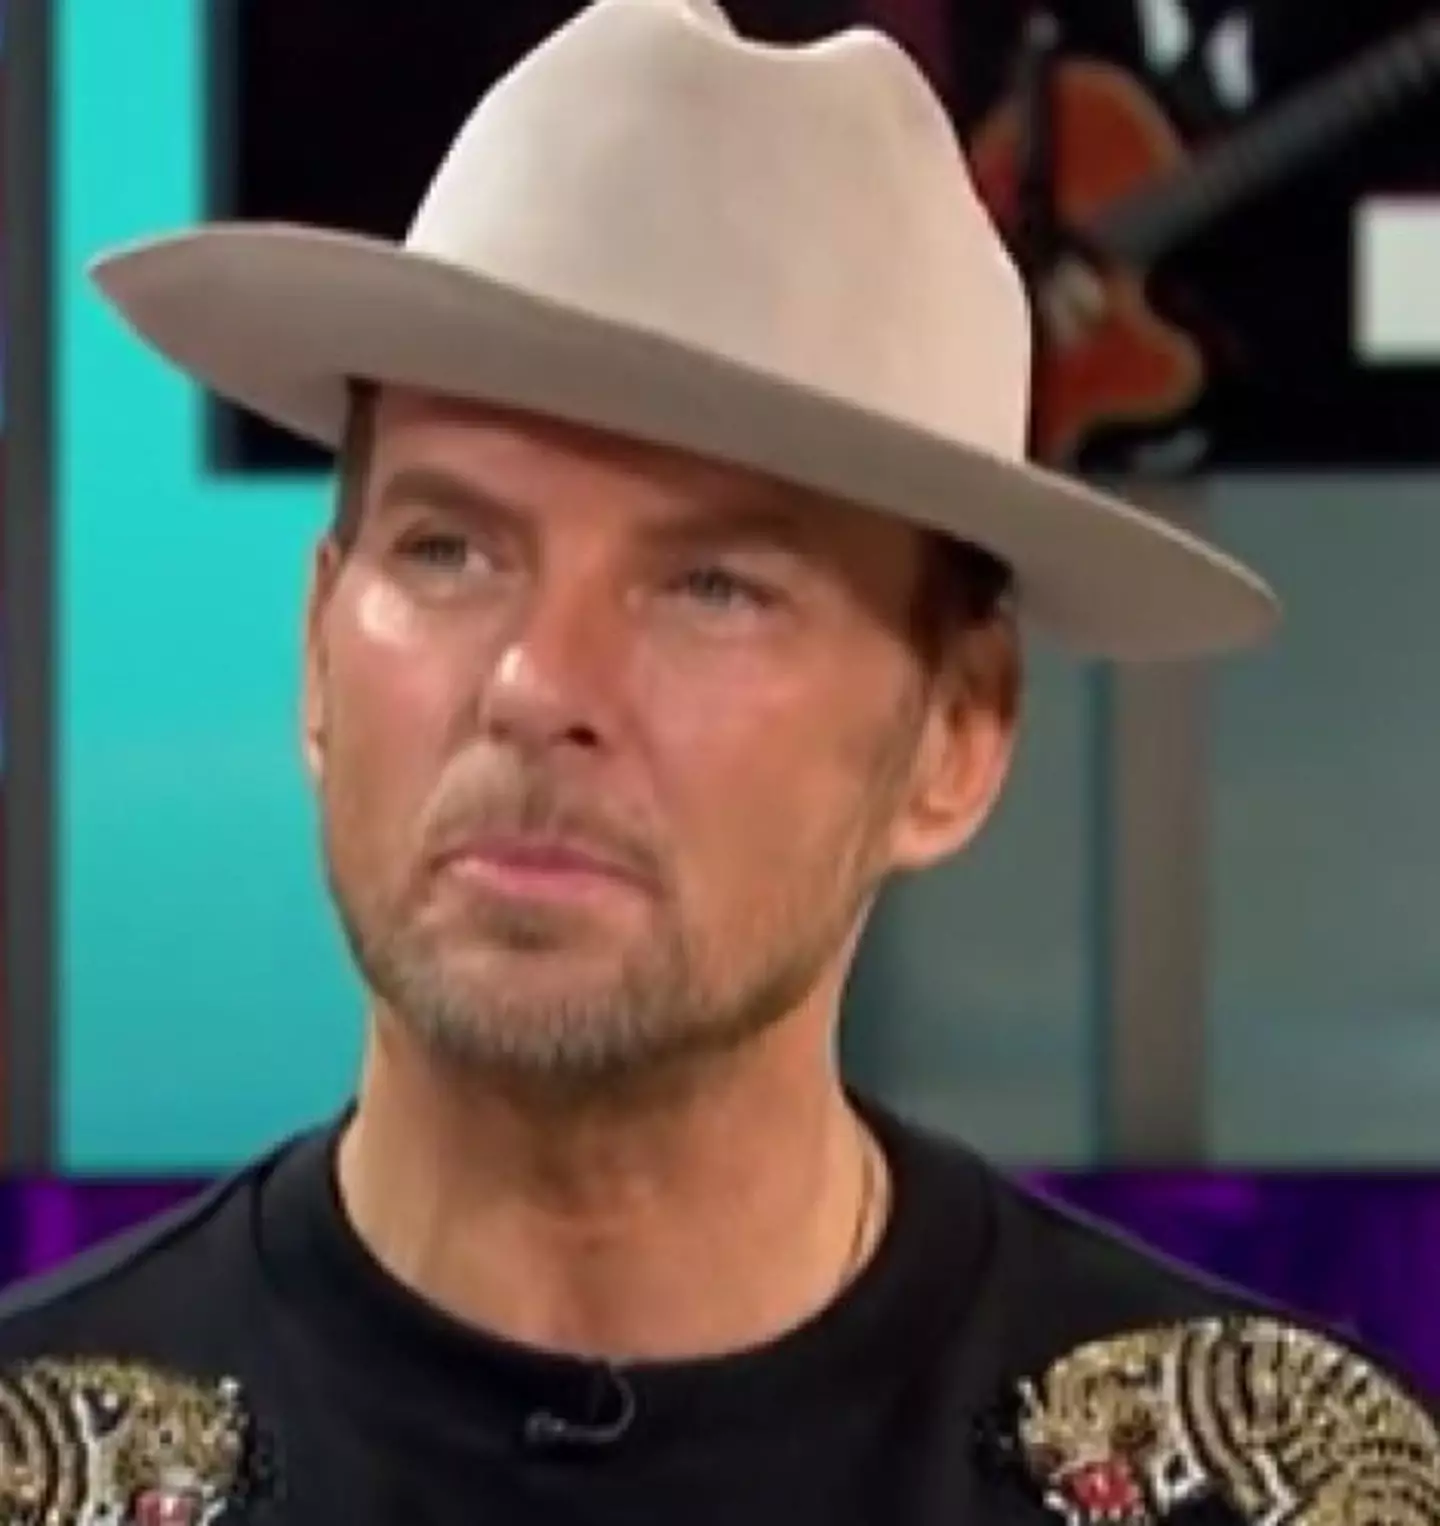 Matt Goss appealed to his twin brother during a live TV interview.